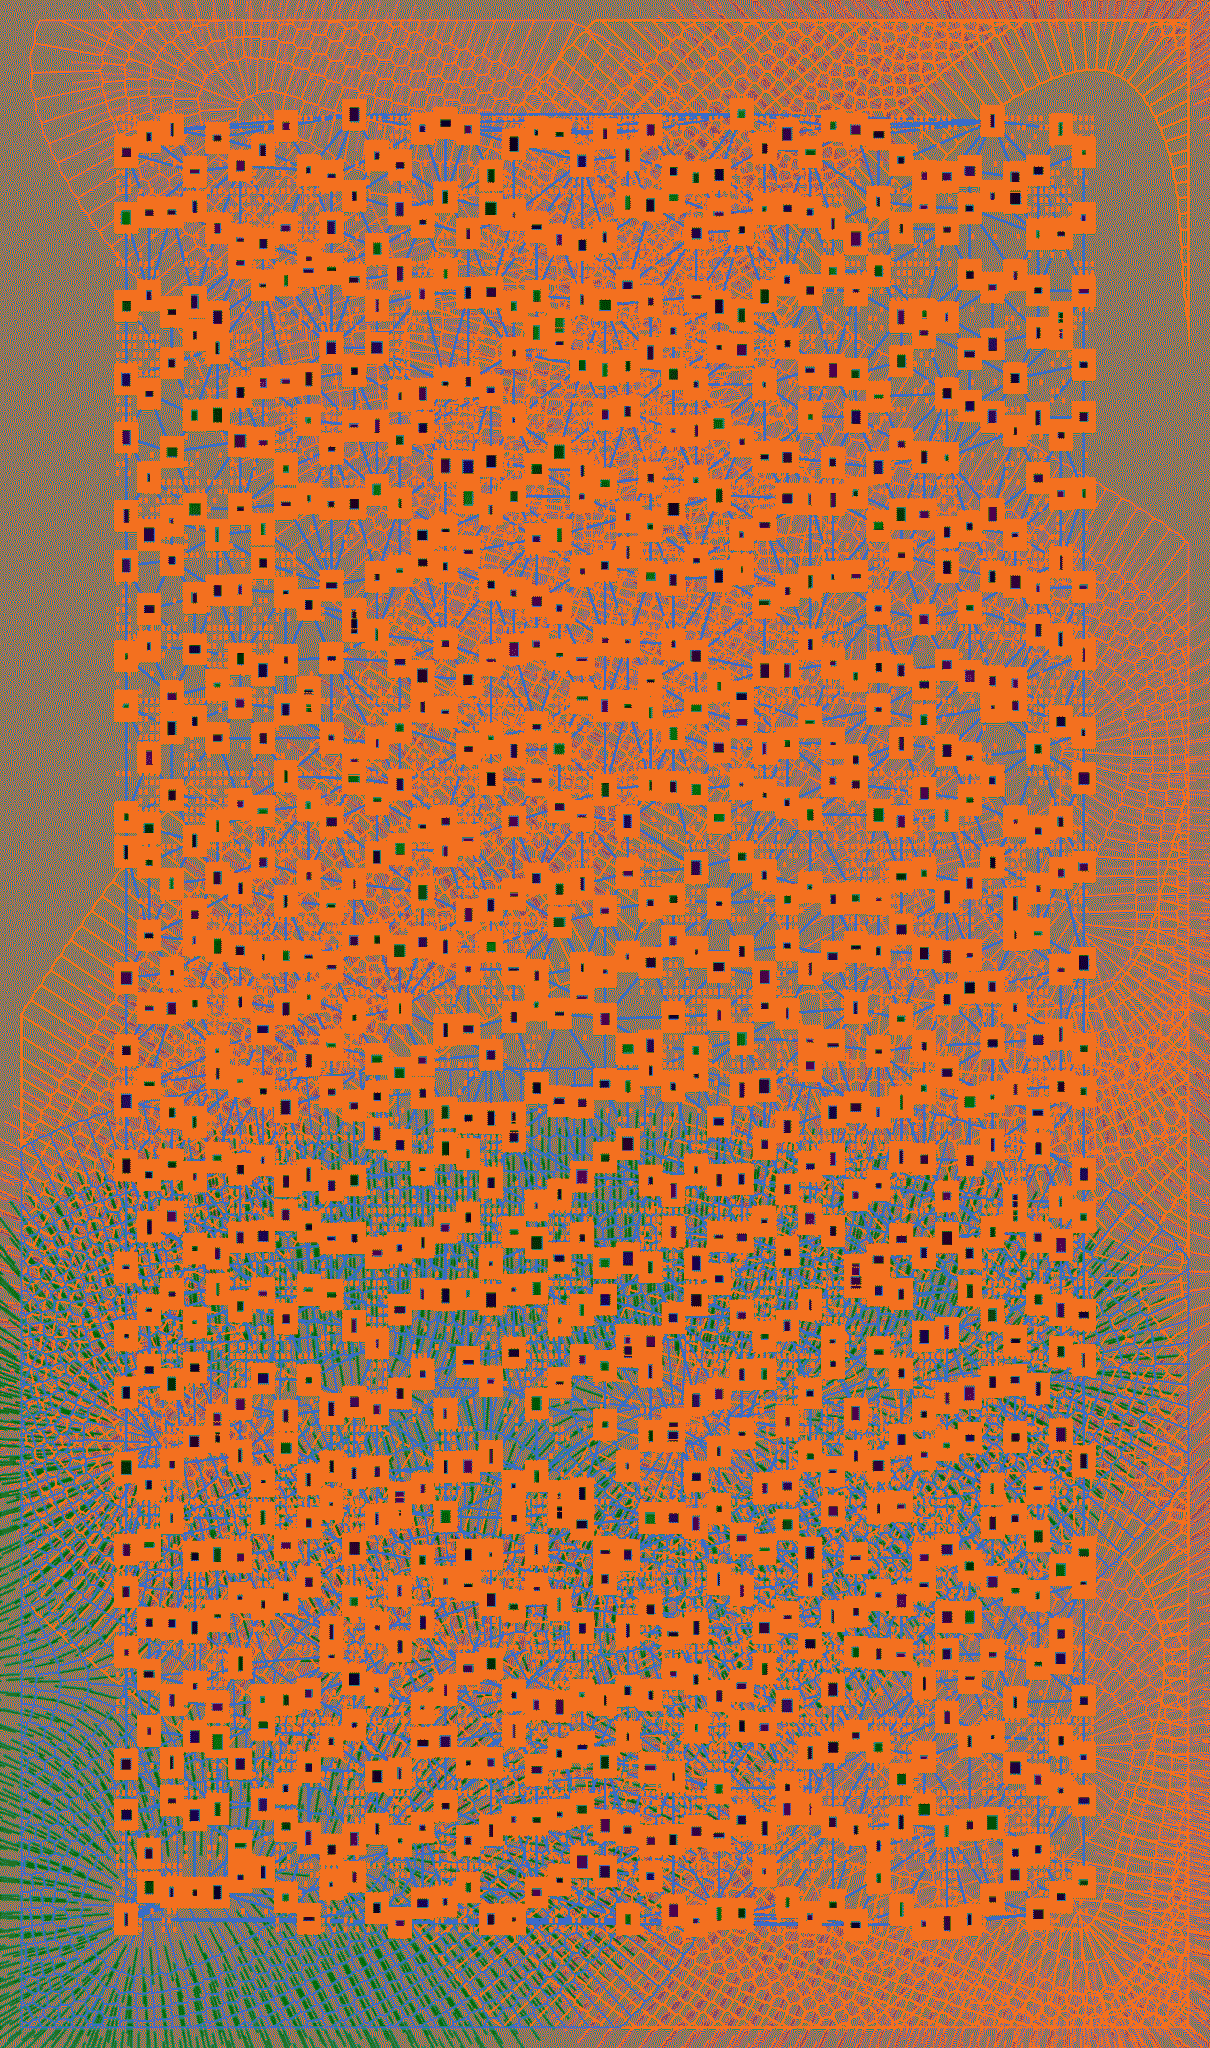 Layered Algorithmic Abstraction #177 